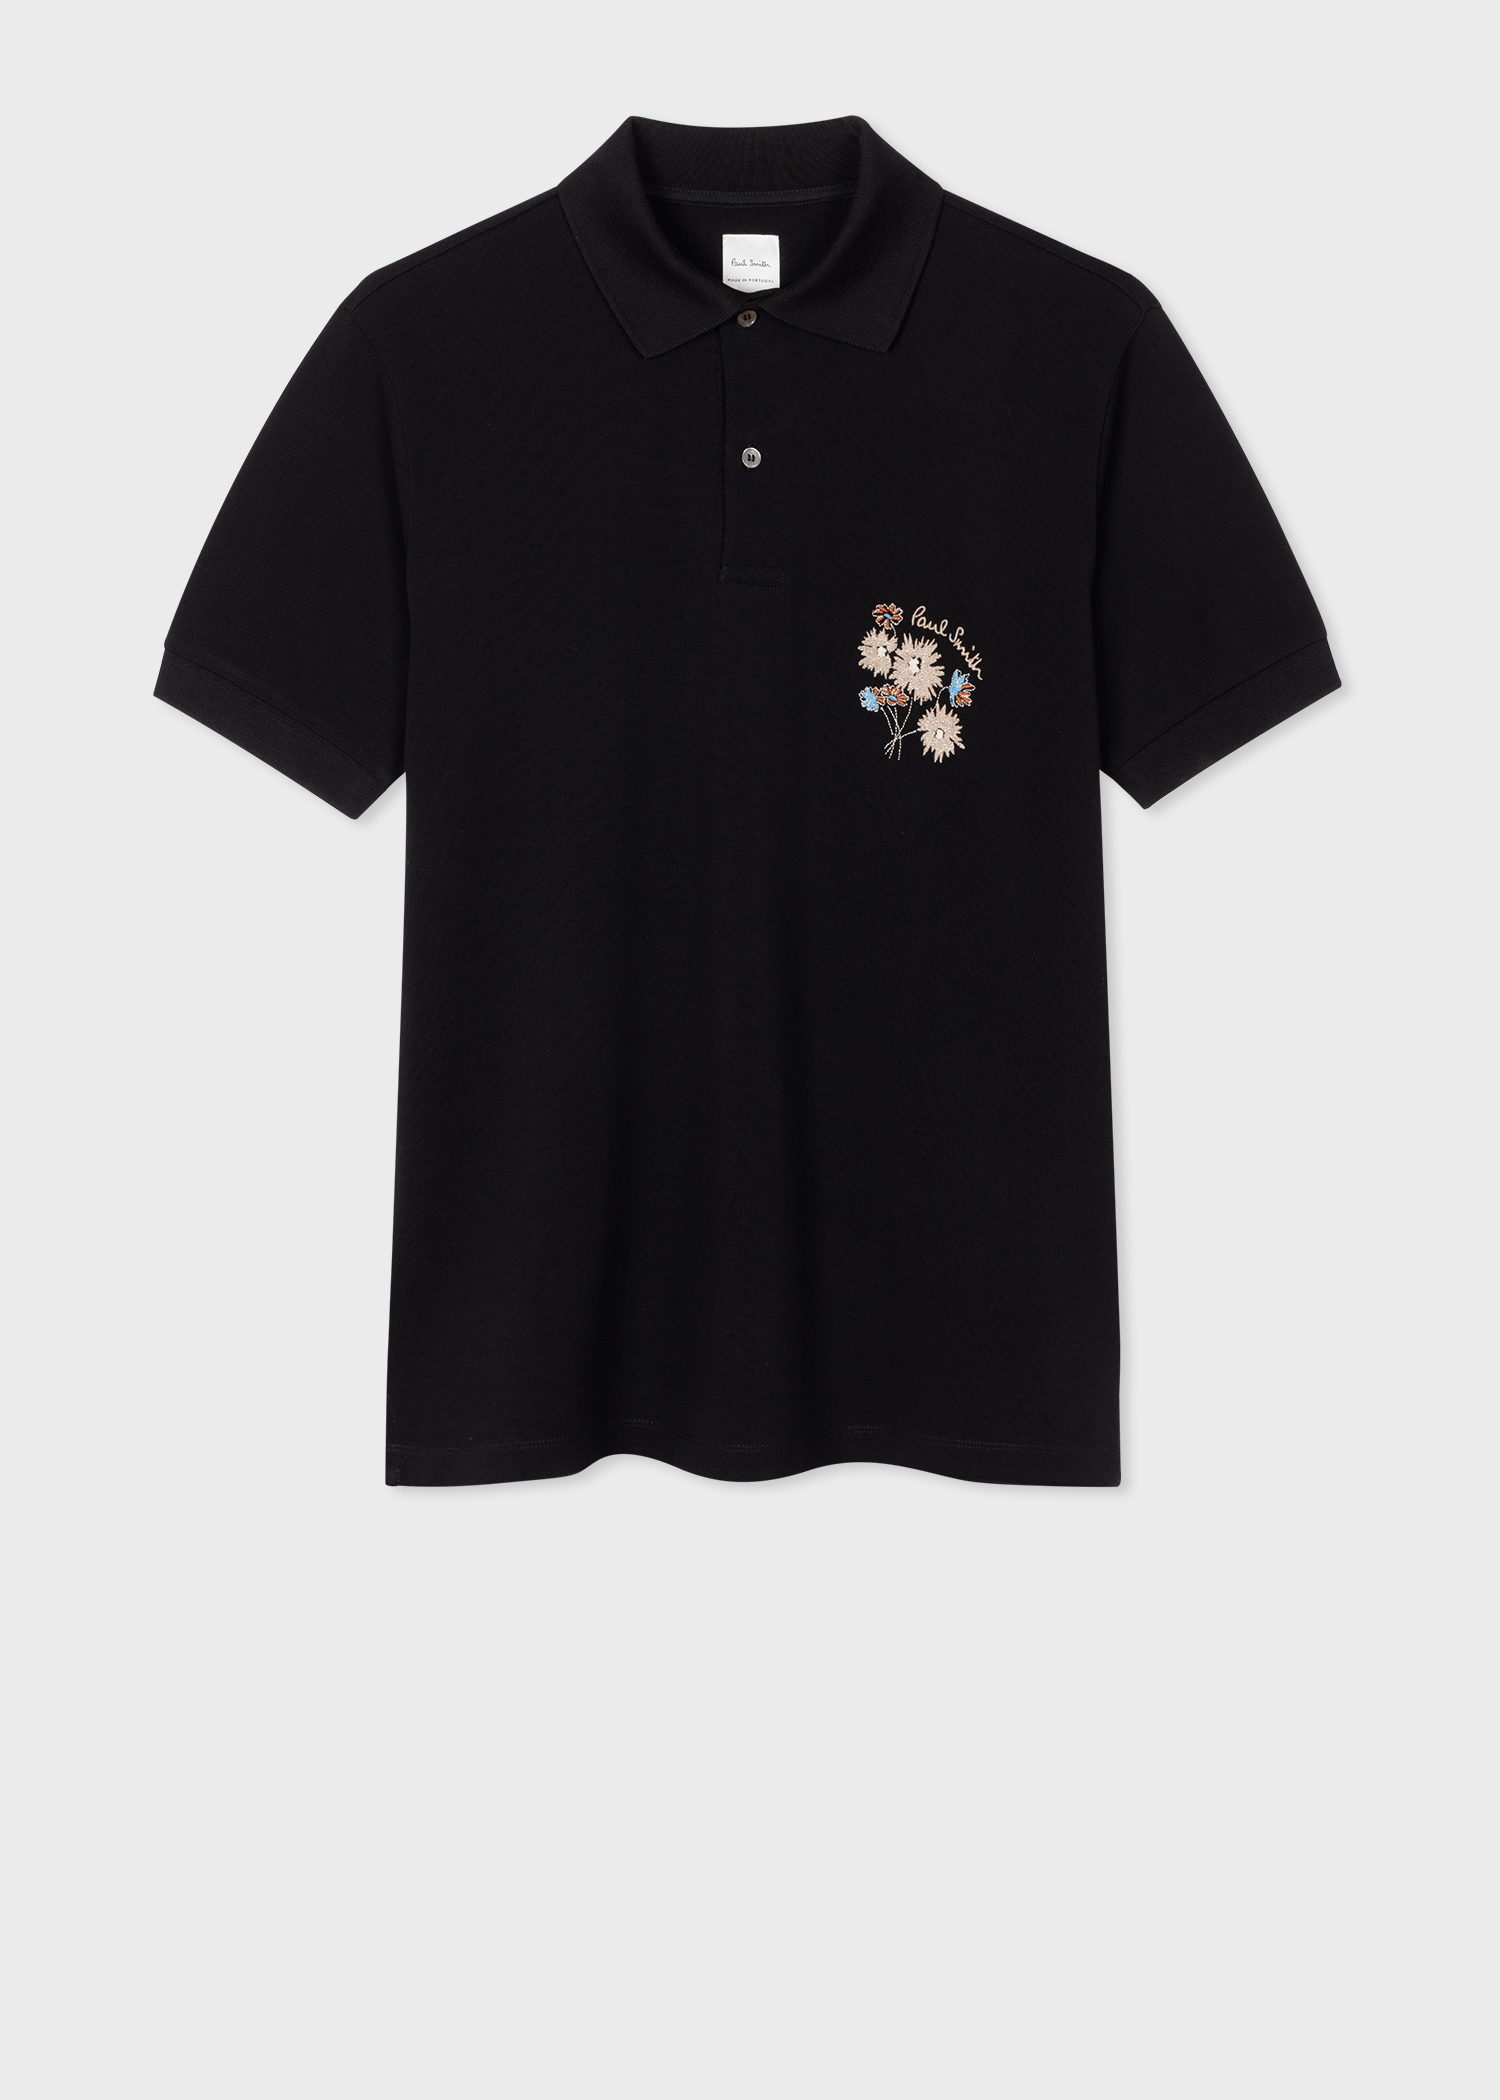 Men's Black Embroidered Flower Cotton Polo Shirt